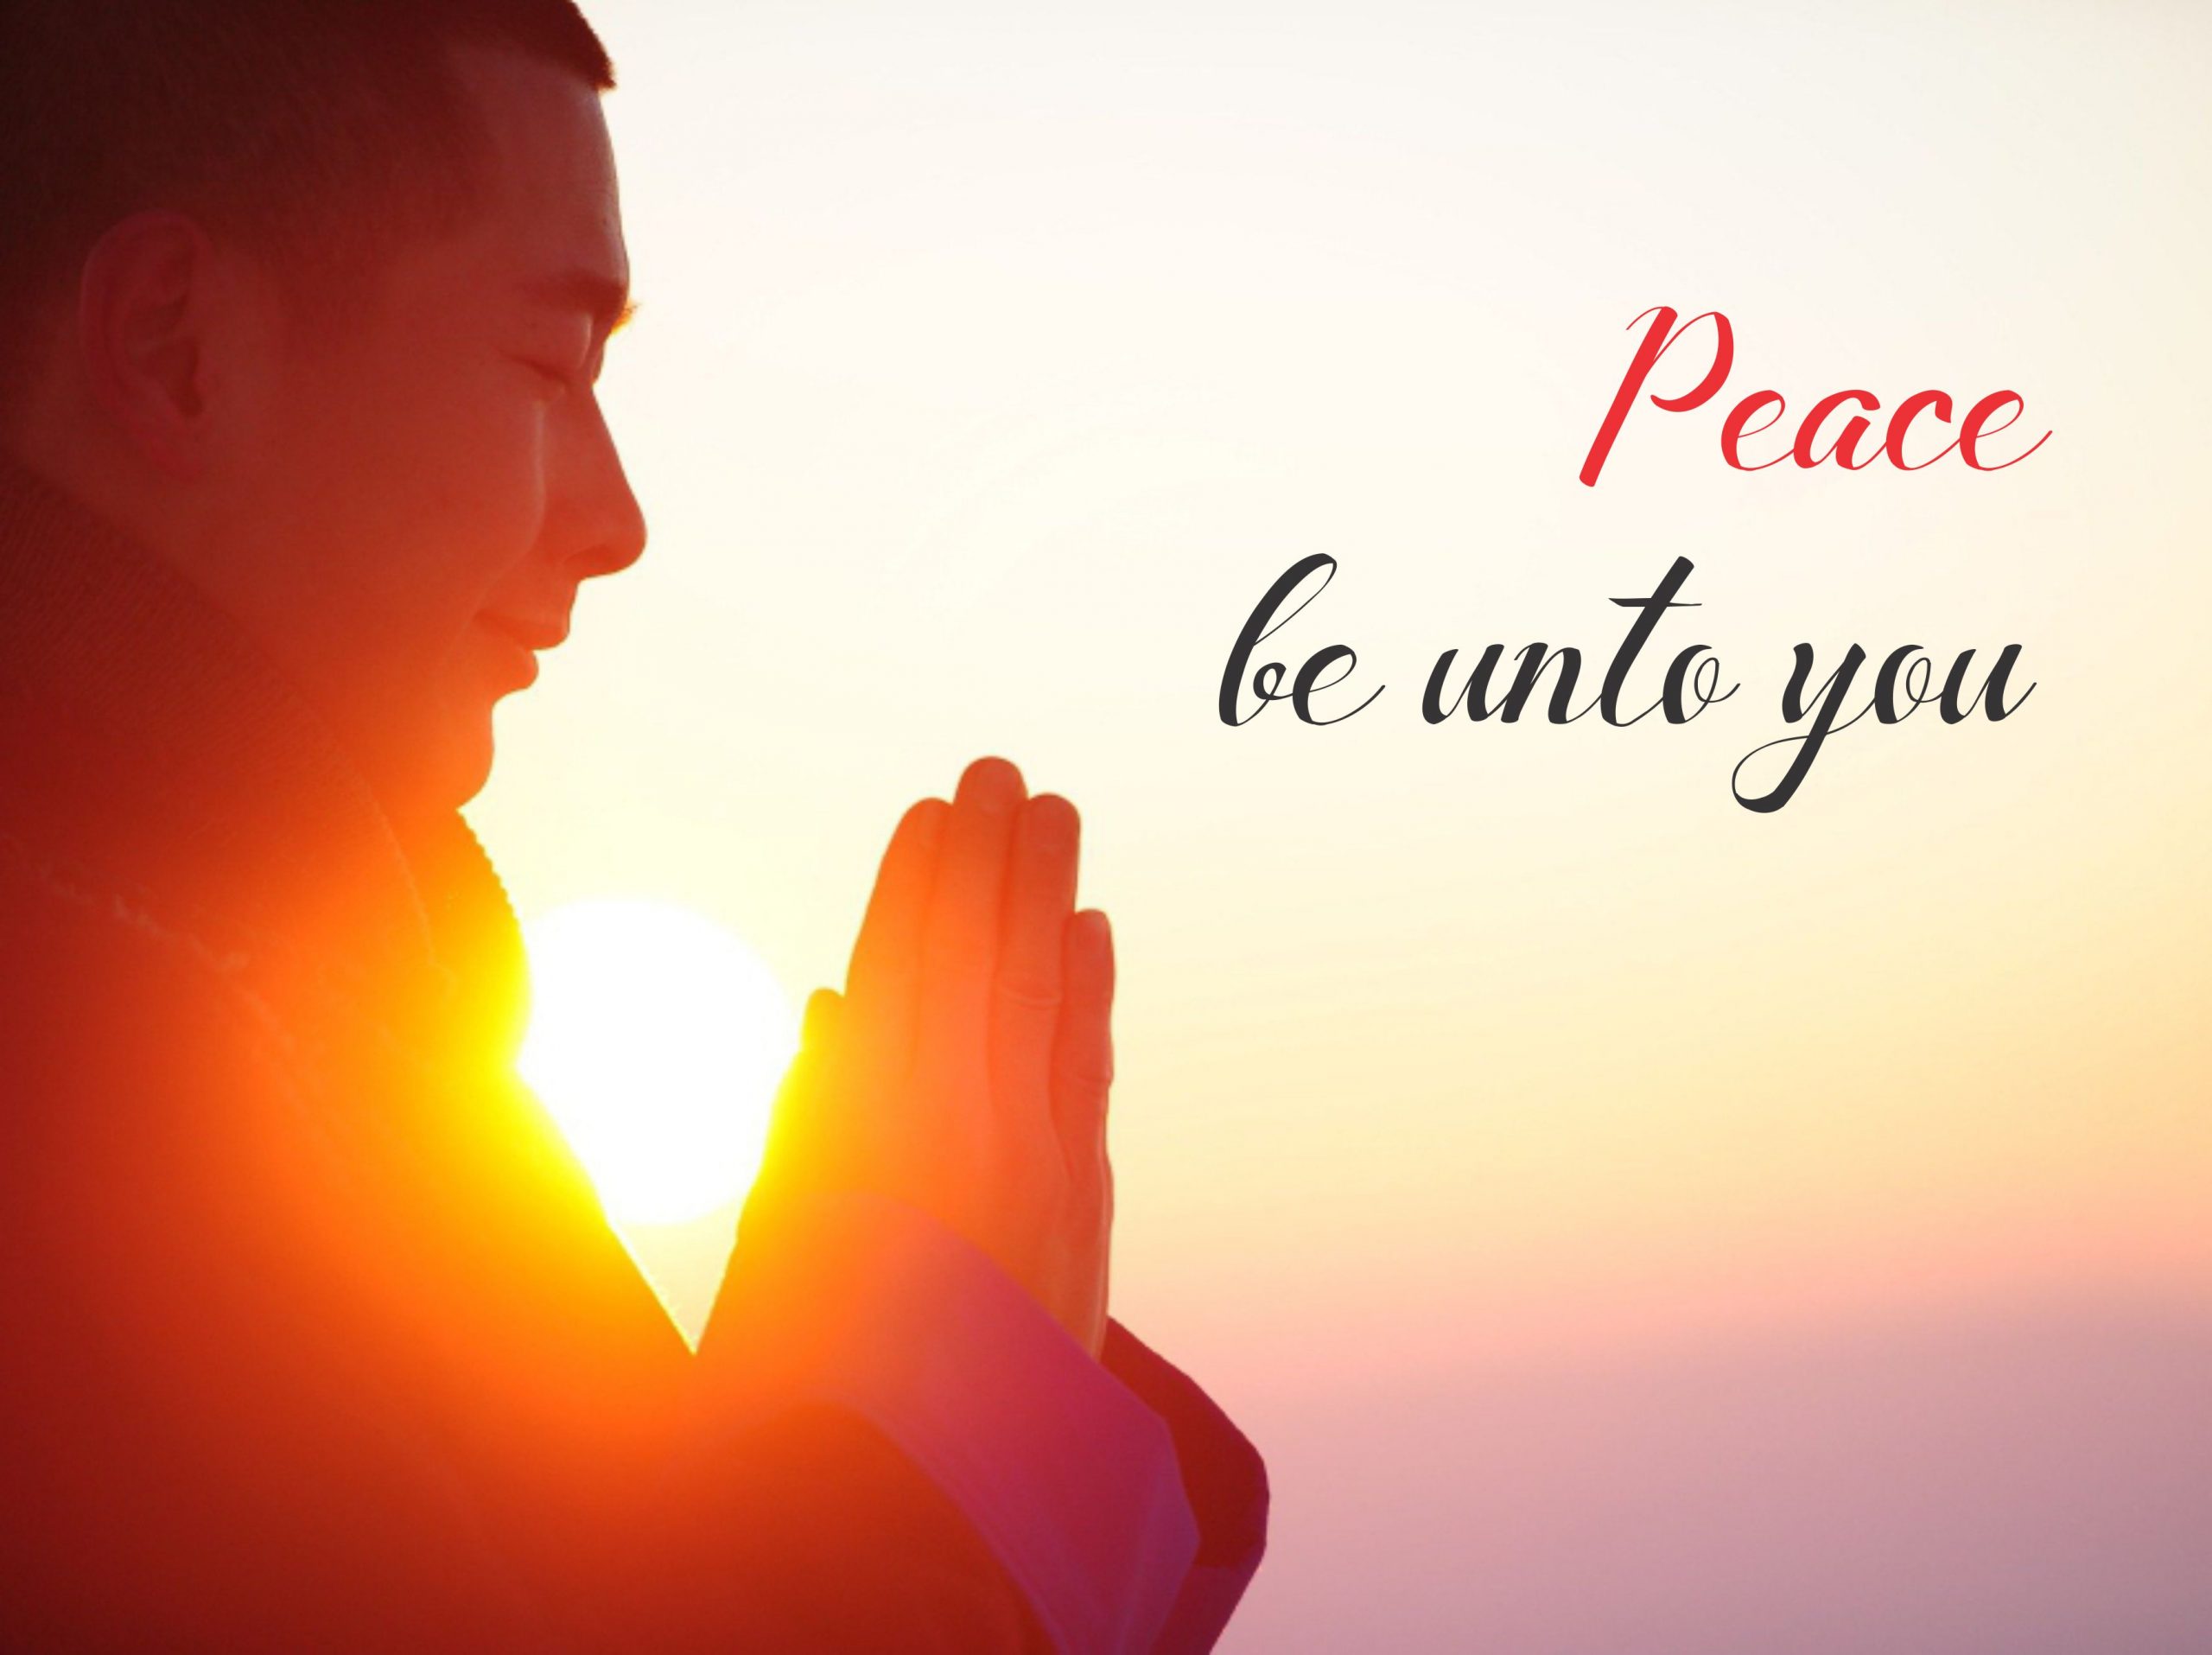 6 Powerful Steps to Find Inner Peace